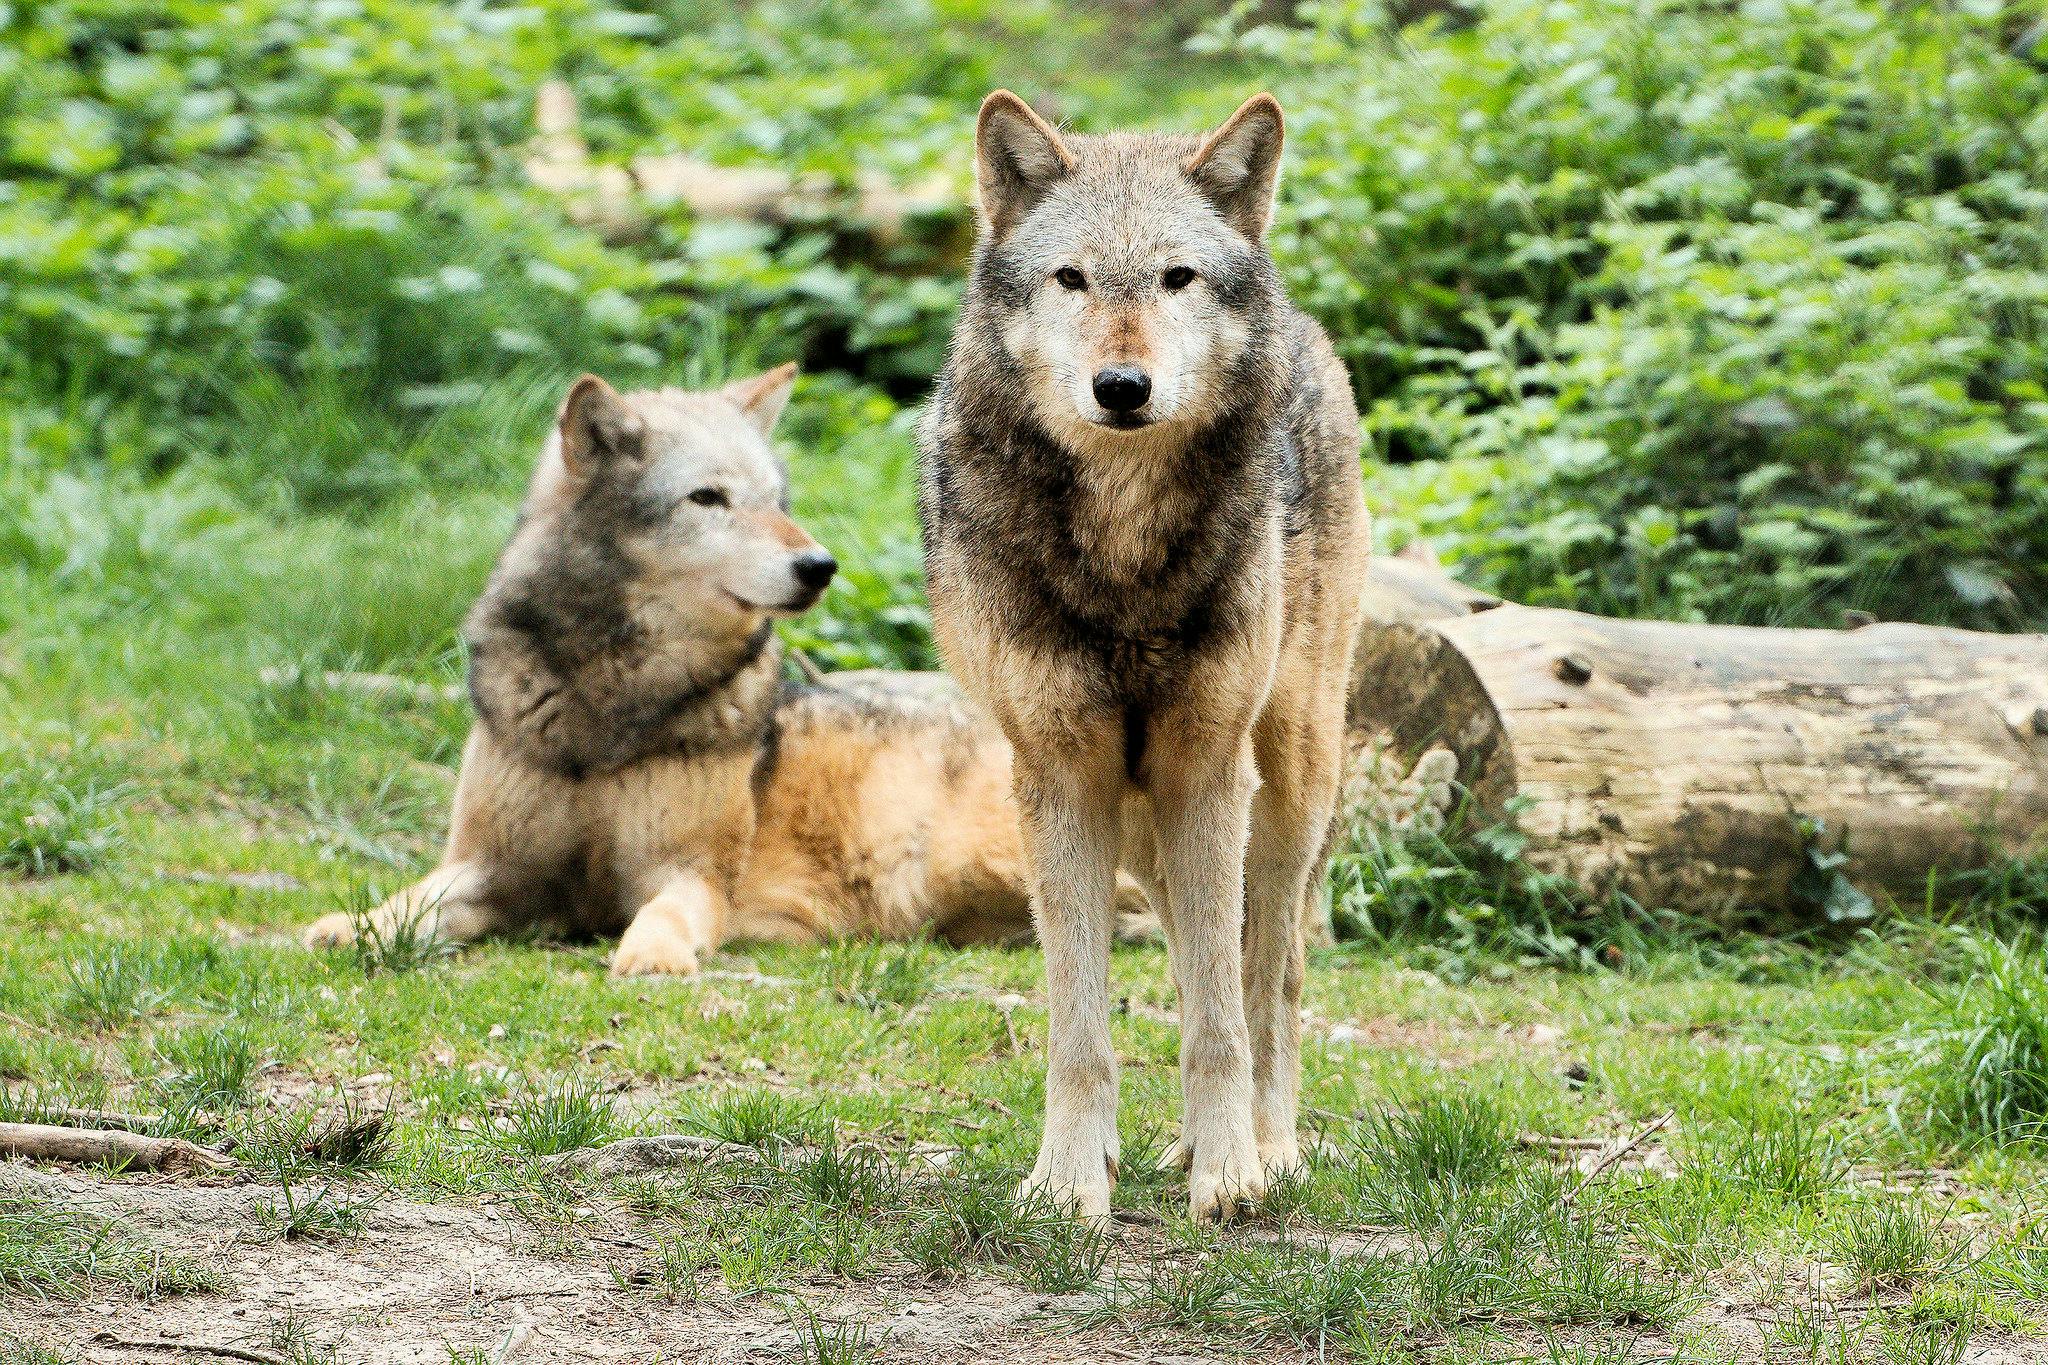 An image of two wolves in greenery. The omegaverse was inspired by erroneous understandings of wolf pack dynamics.